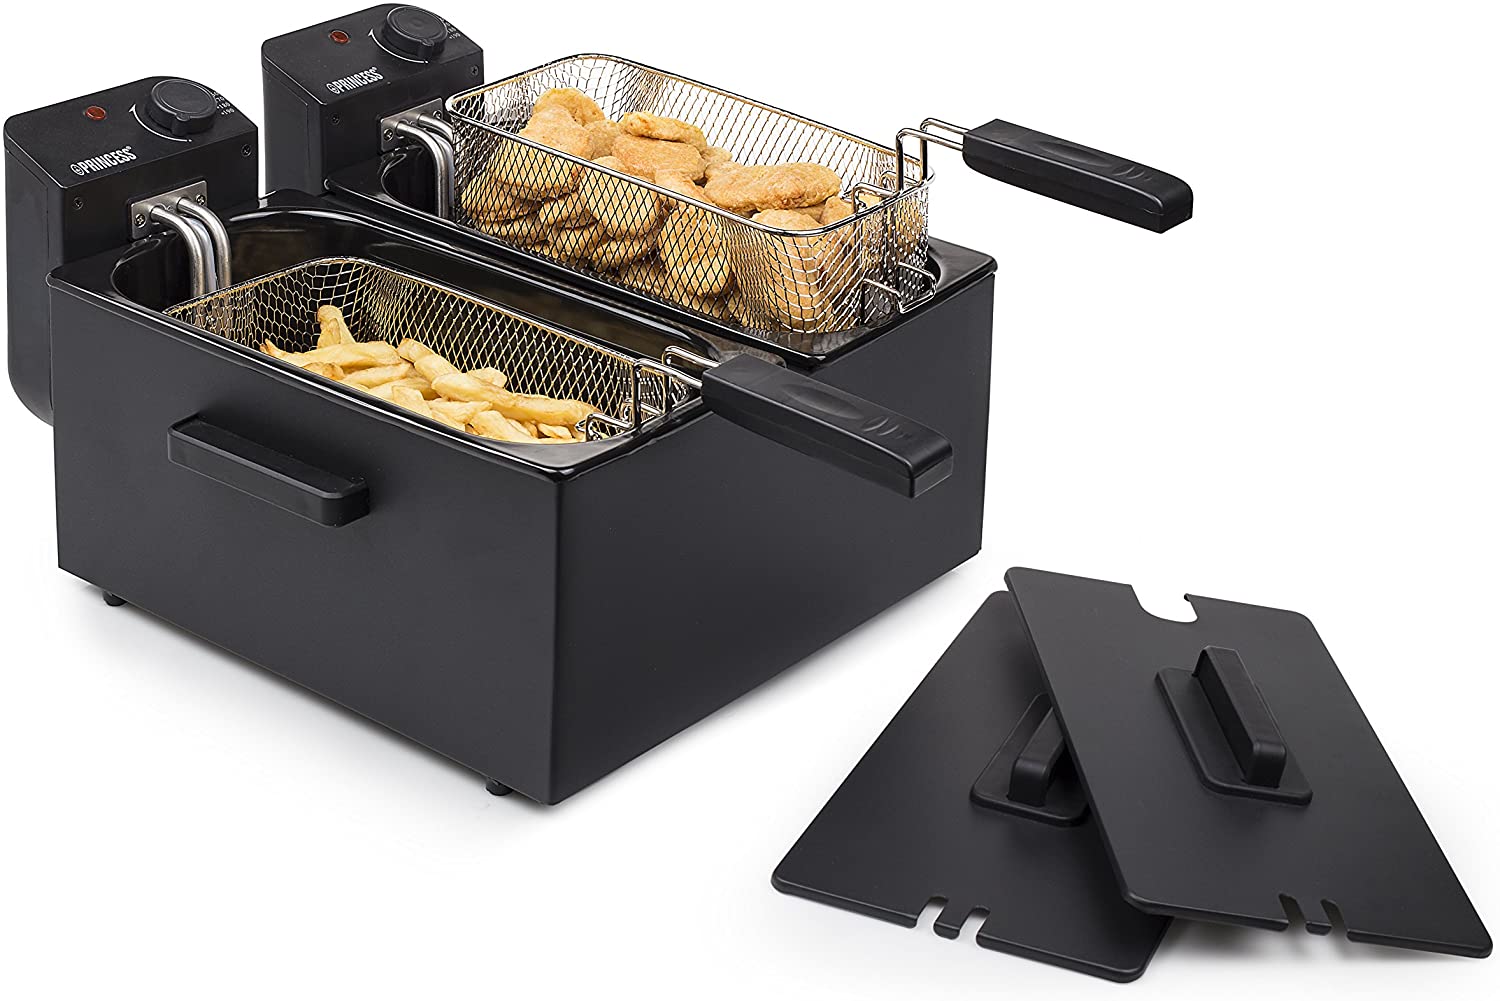 Princess Stainless Steel Double Fryer in Black, 2 x 3 Litres (2 x 1800 Watt) with Cold Zone Function, 183028